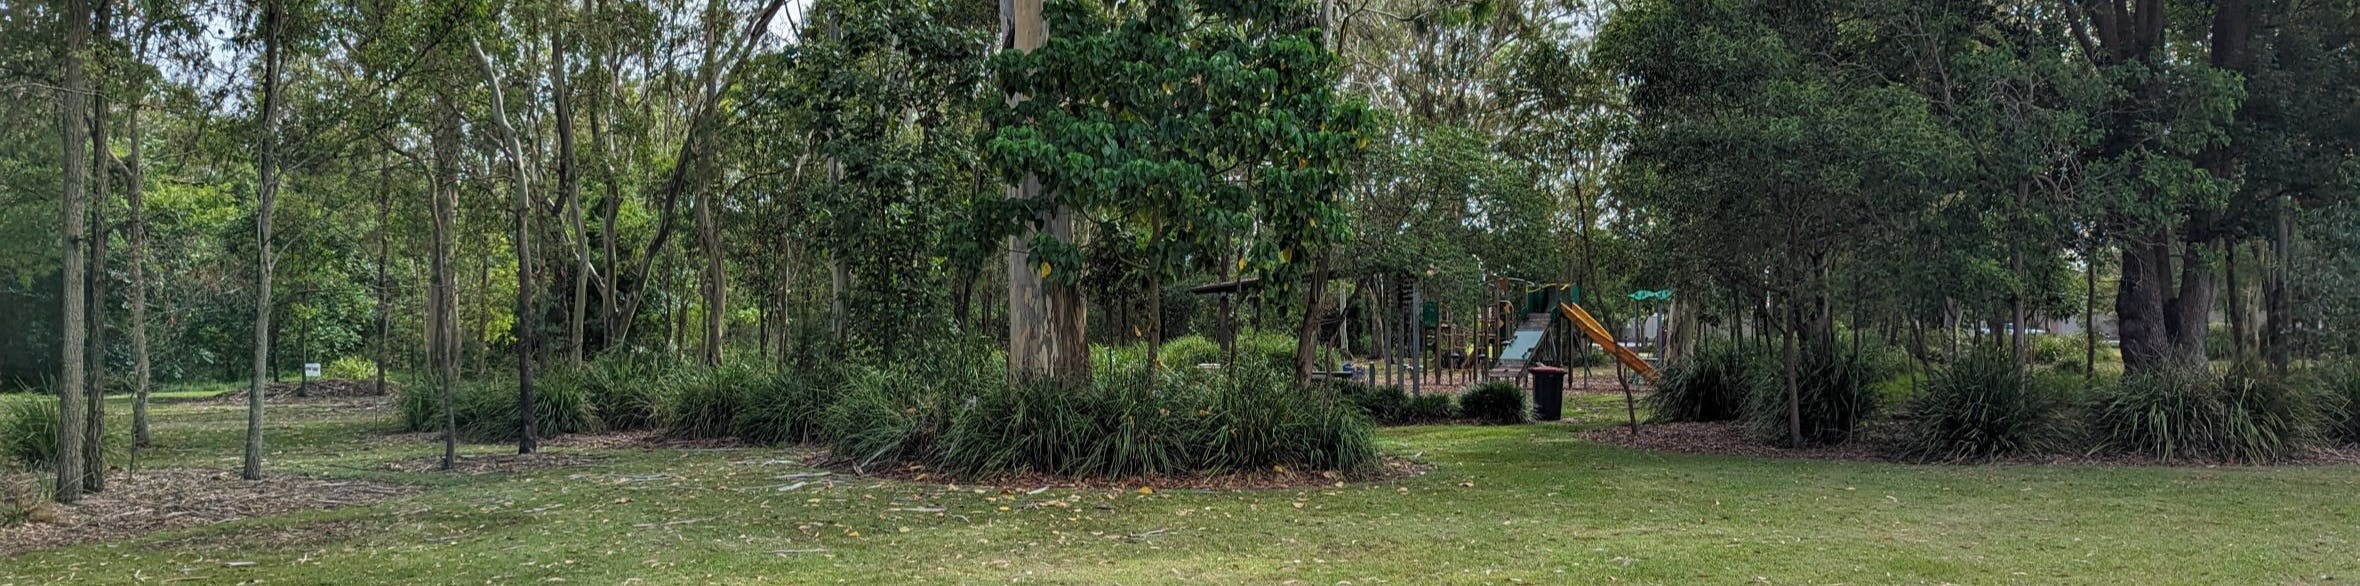 Photo of grassy lawn and trees in Macaranga Crescent Park